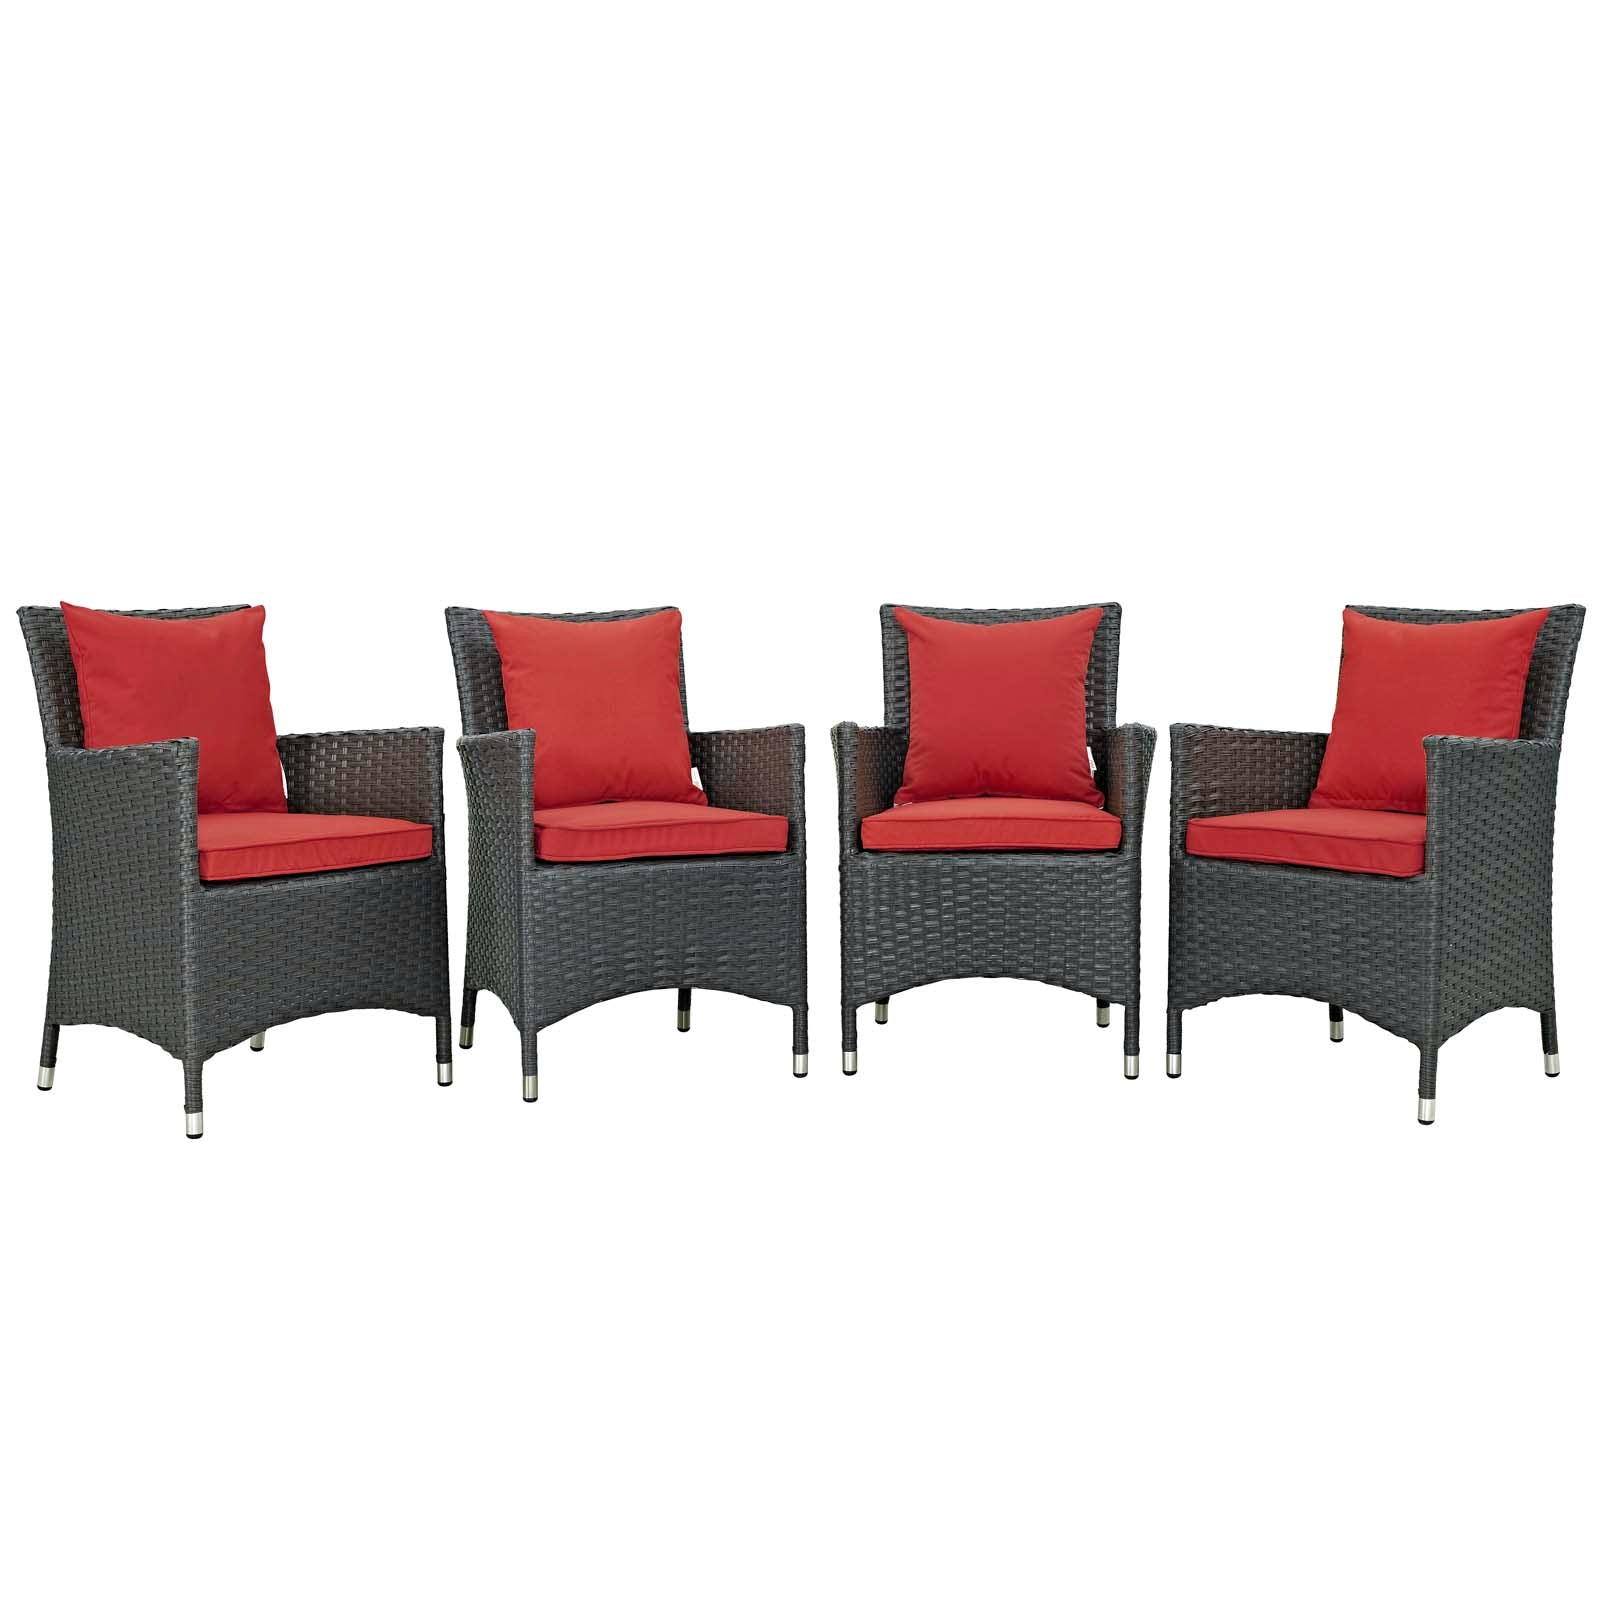 Modway Outdoor Dining Sets - Sojourn 4 Piece Outdoor Patio Sunbrella Dining Set Canvas Red